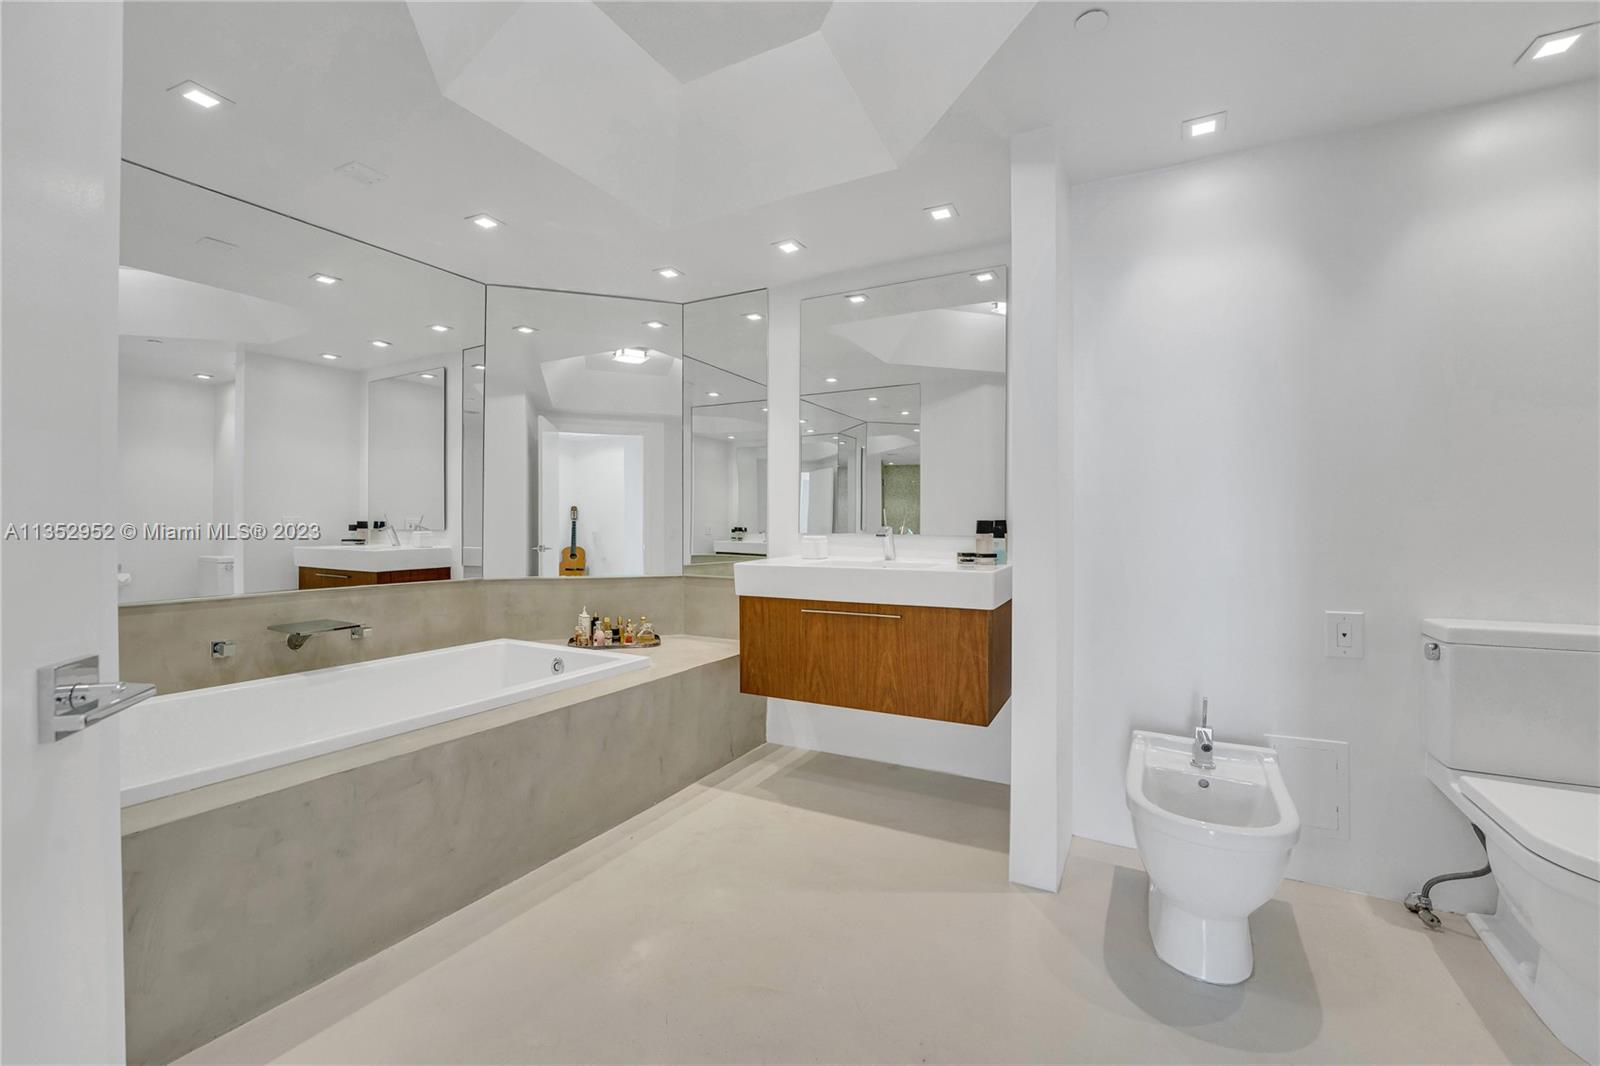 Primary bathroom with glass shower and jacuzzi tub